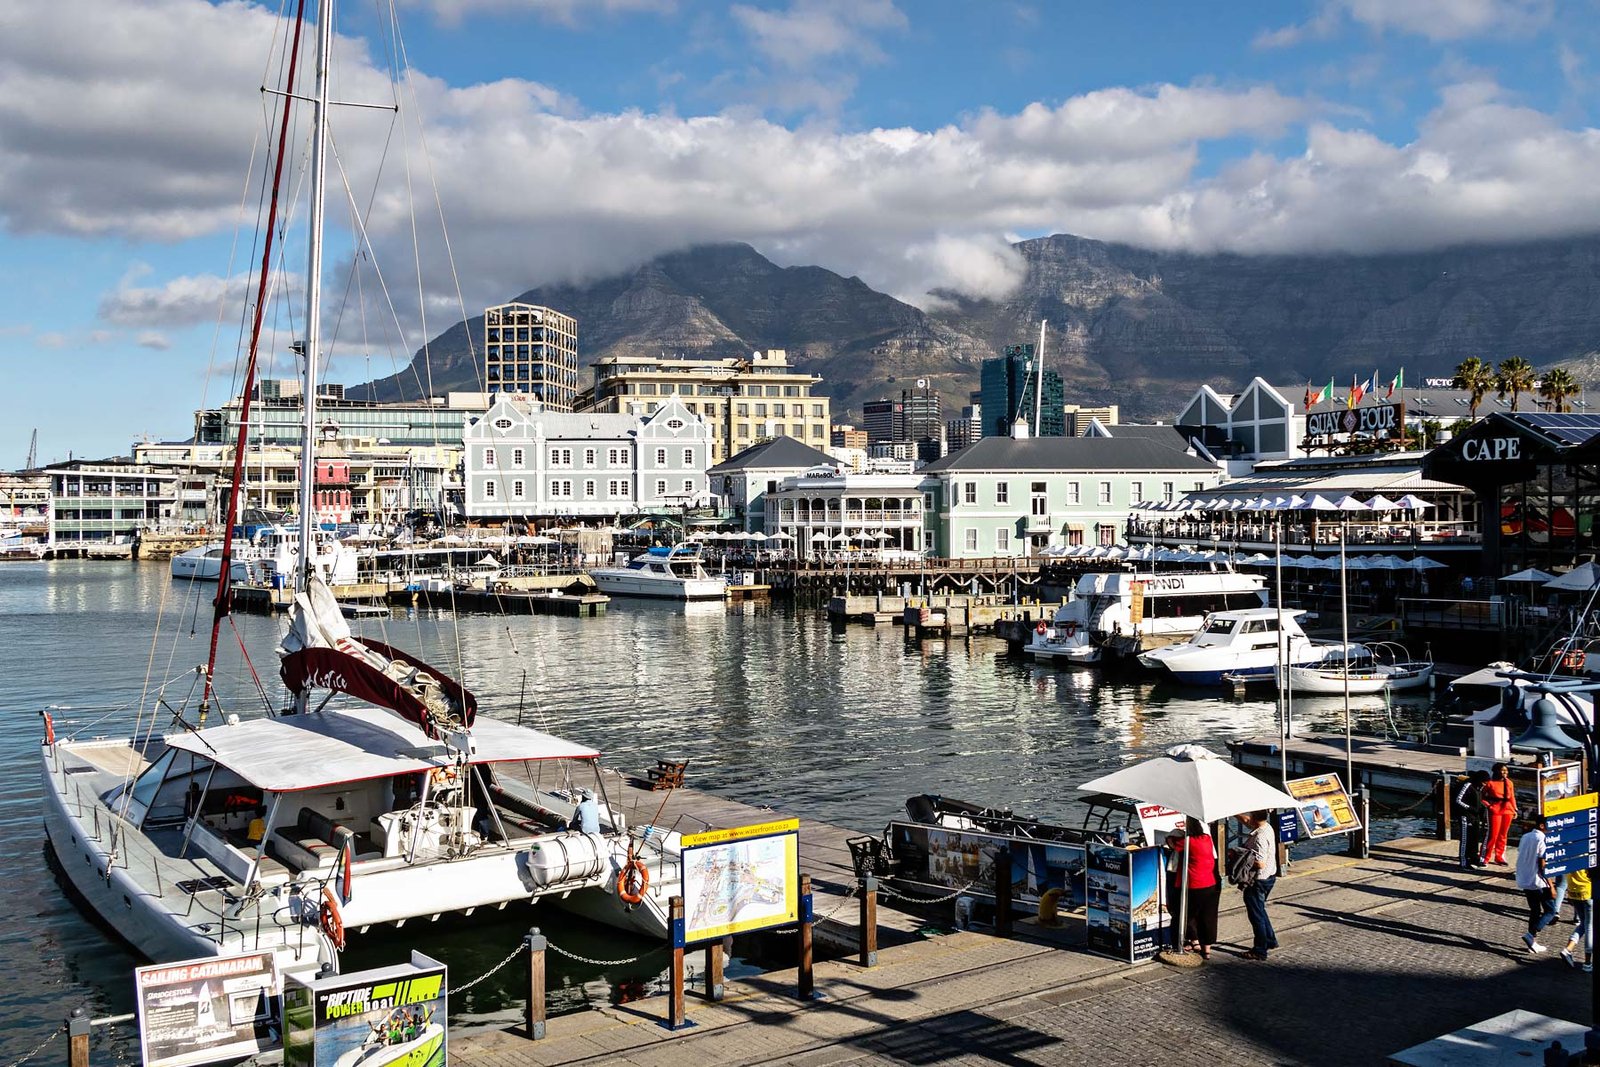 V&A Waterfront with Table Mountain in the background.